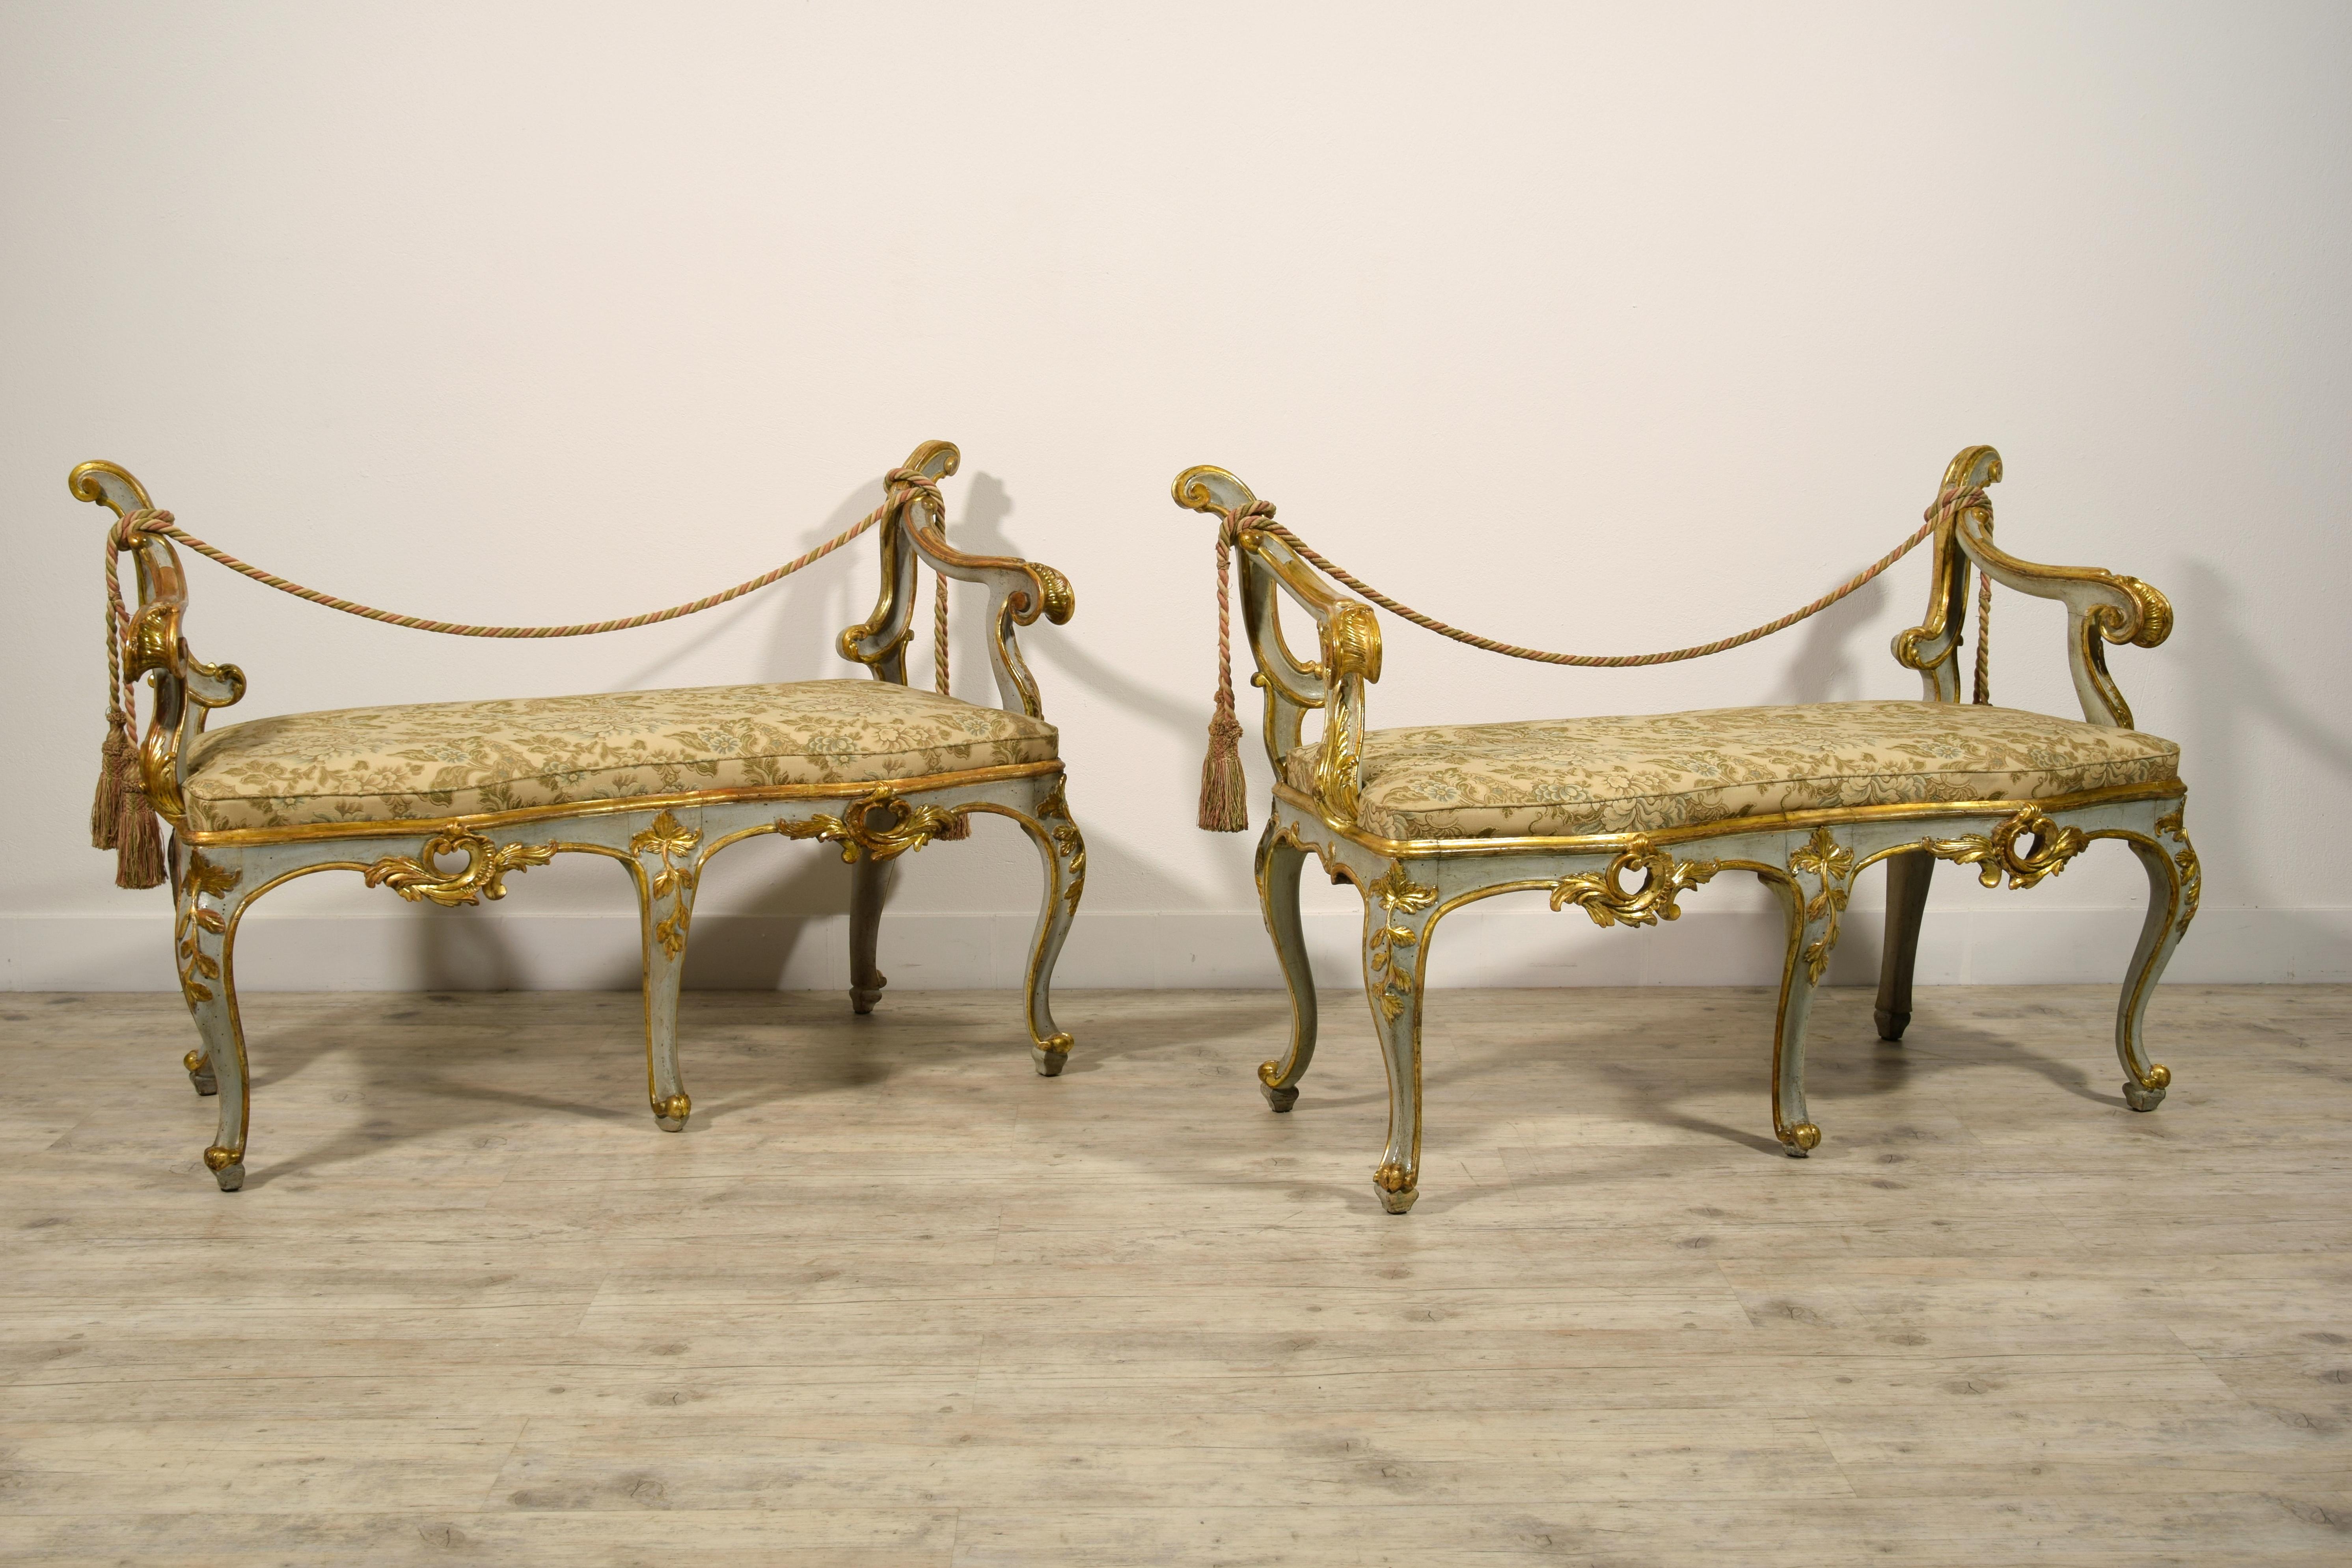 18th century, pair of Italian Baroque lacquered and gilt wood benches 

This particular pair of baroque benches was made in Rome, Italy, in the second half of the 18th century.
Their wooden structure is entirely sculpted, lacquered and gilded in